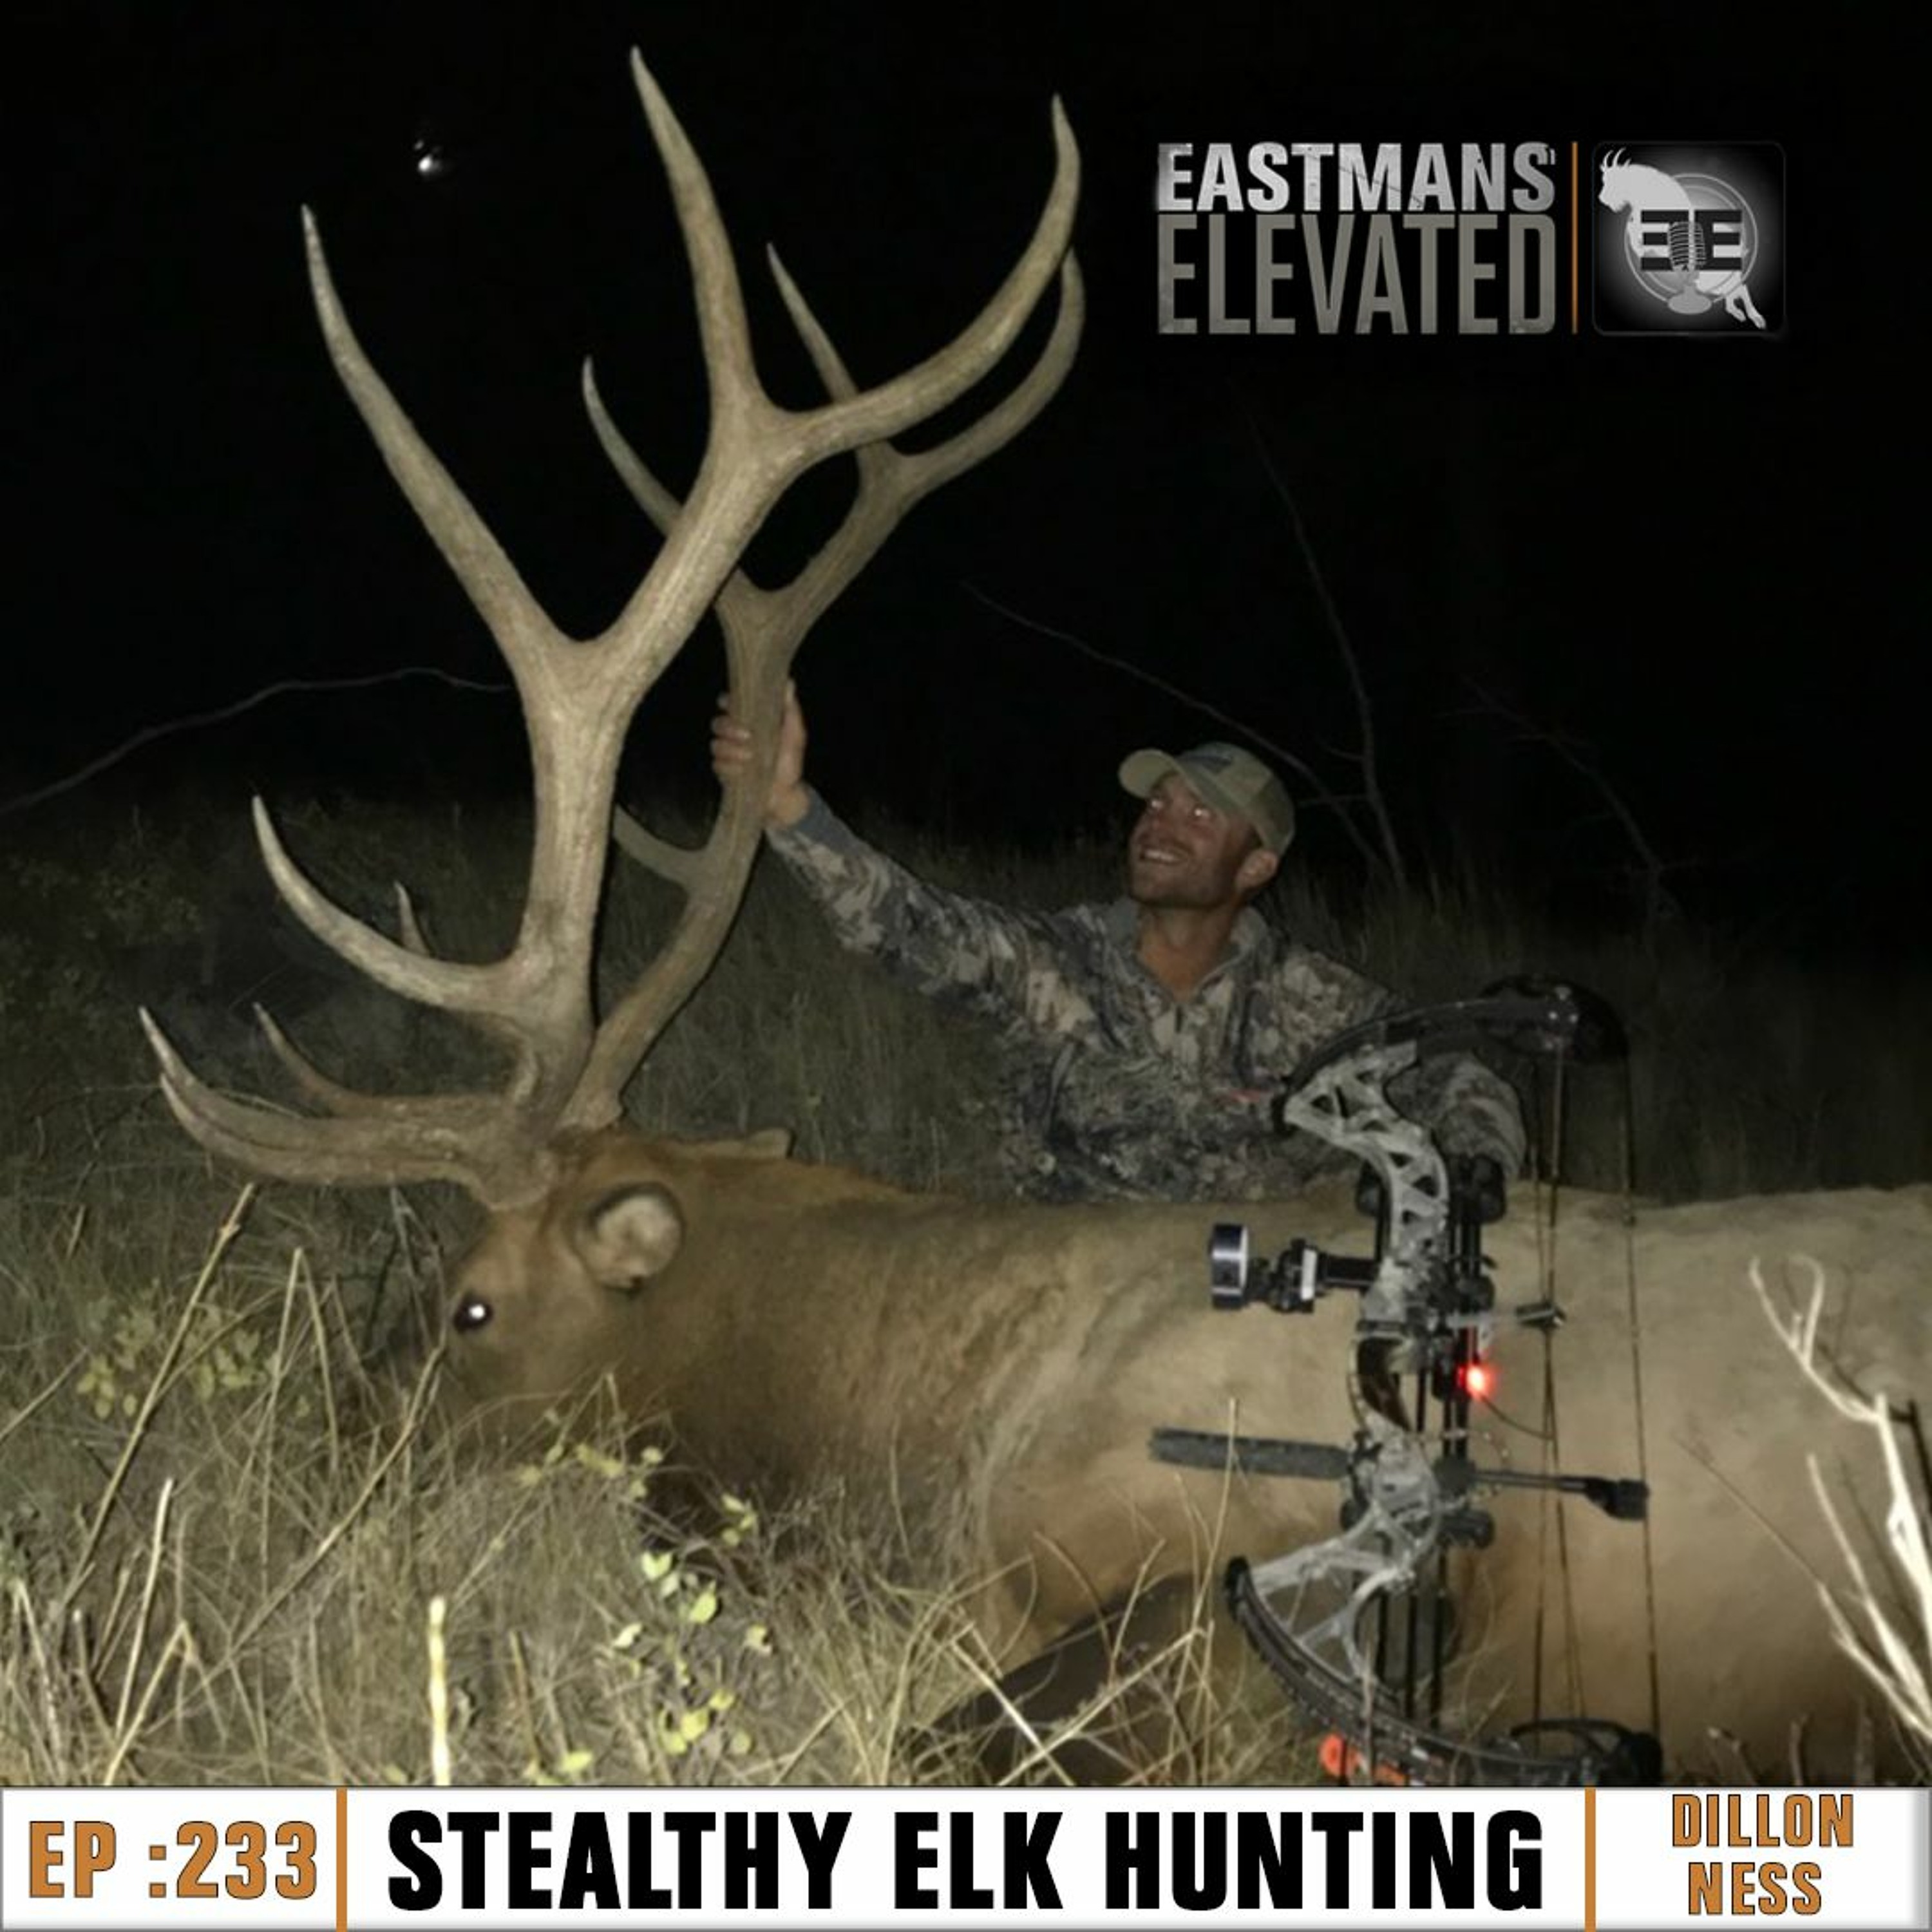 Episode 233: Stealthy Elk Hunting with Dillon Ness